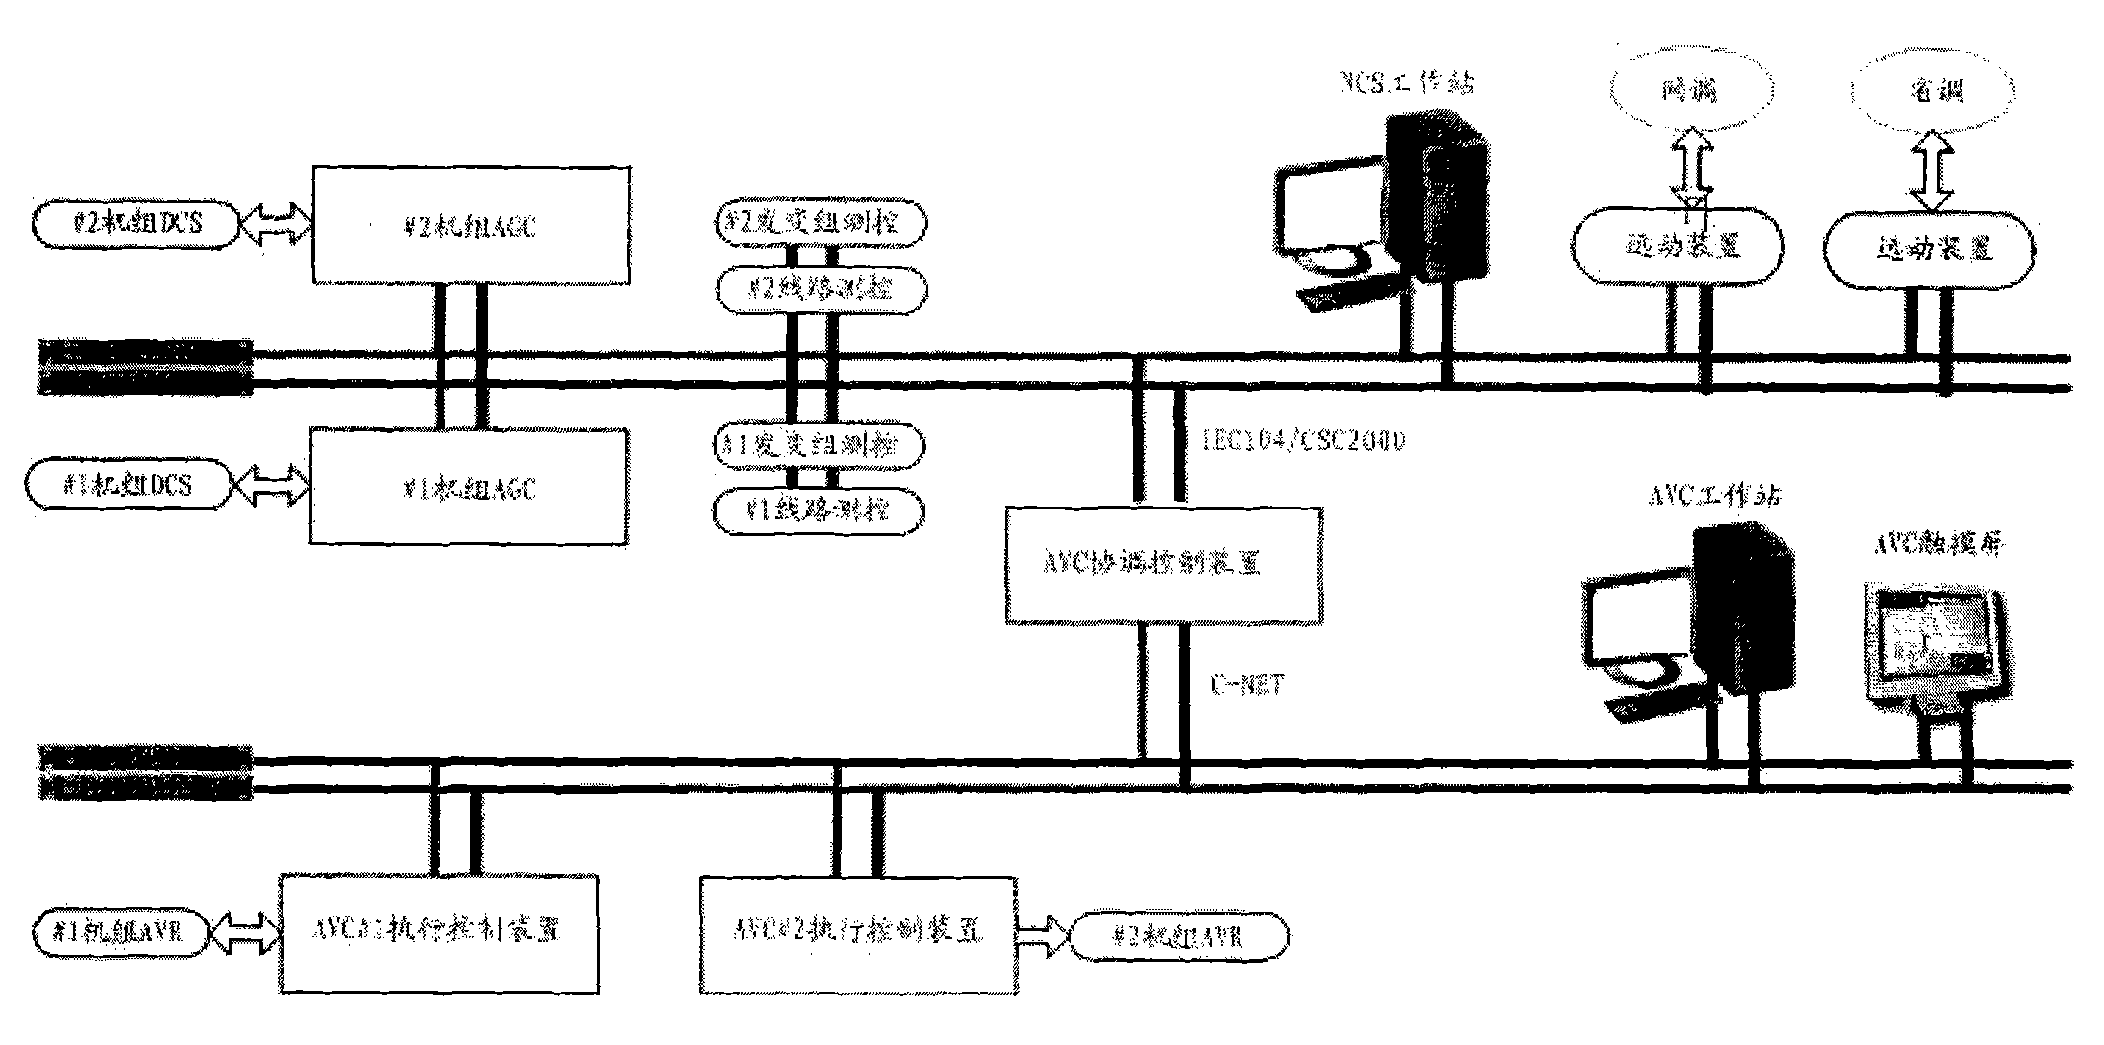 Automatic voltage control substation system of distributed power station based on devices